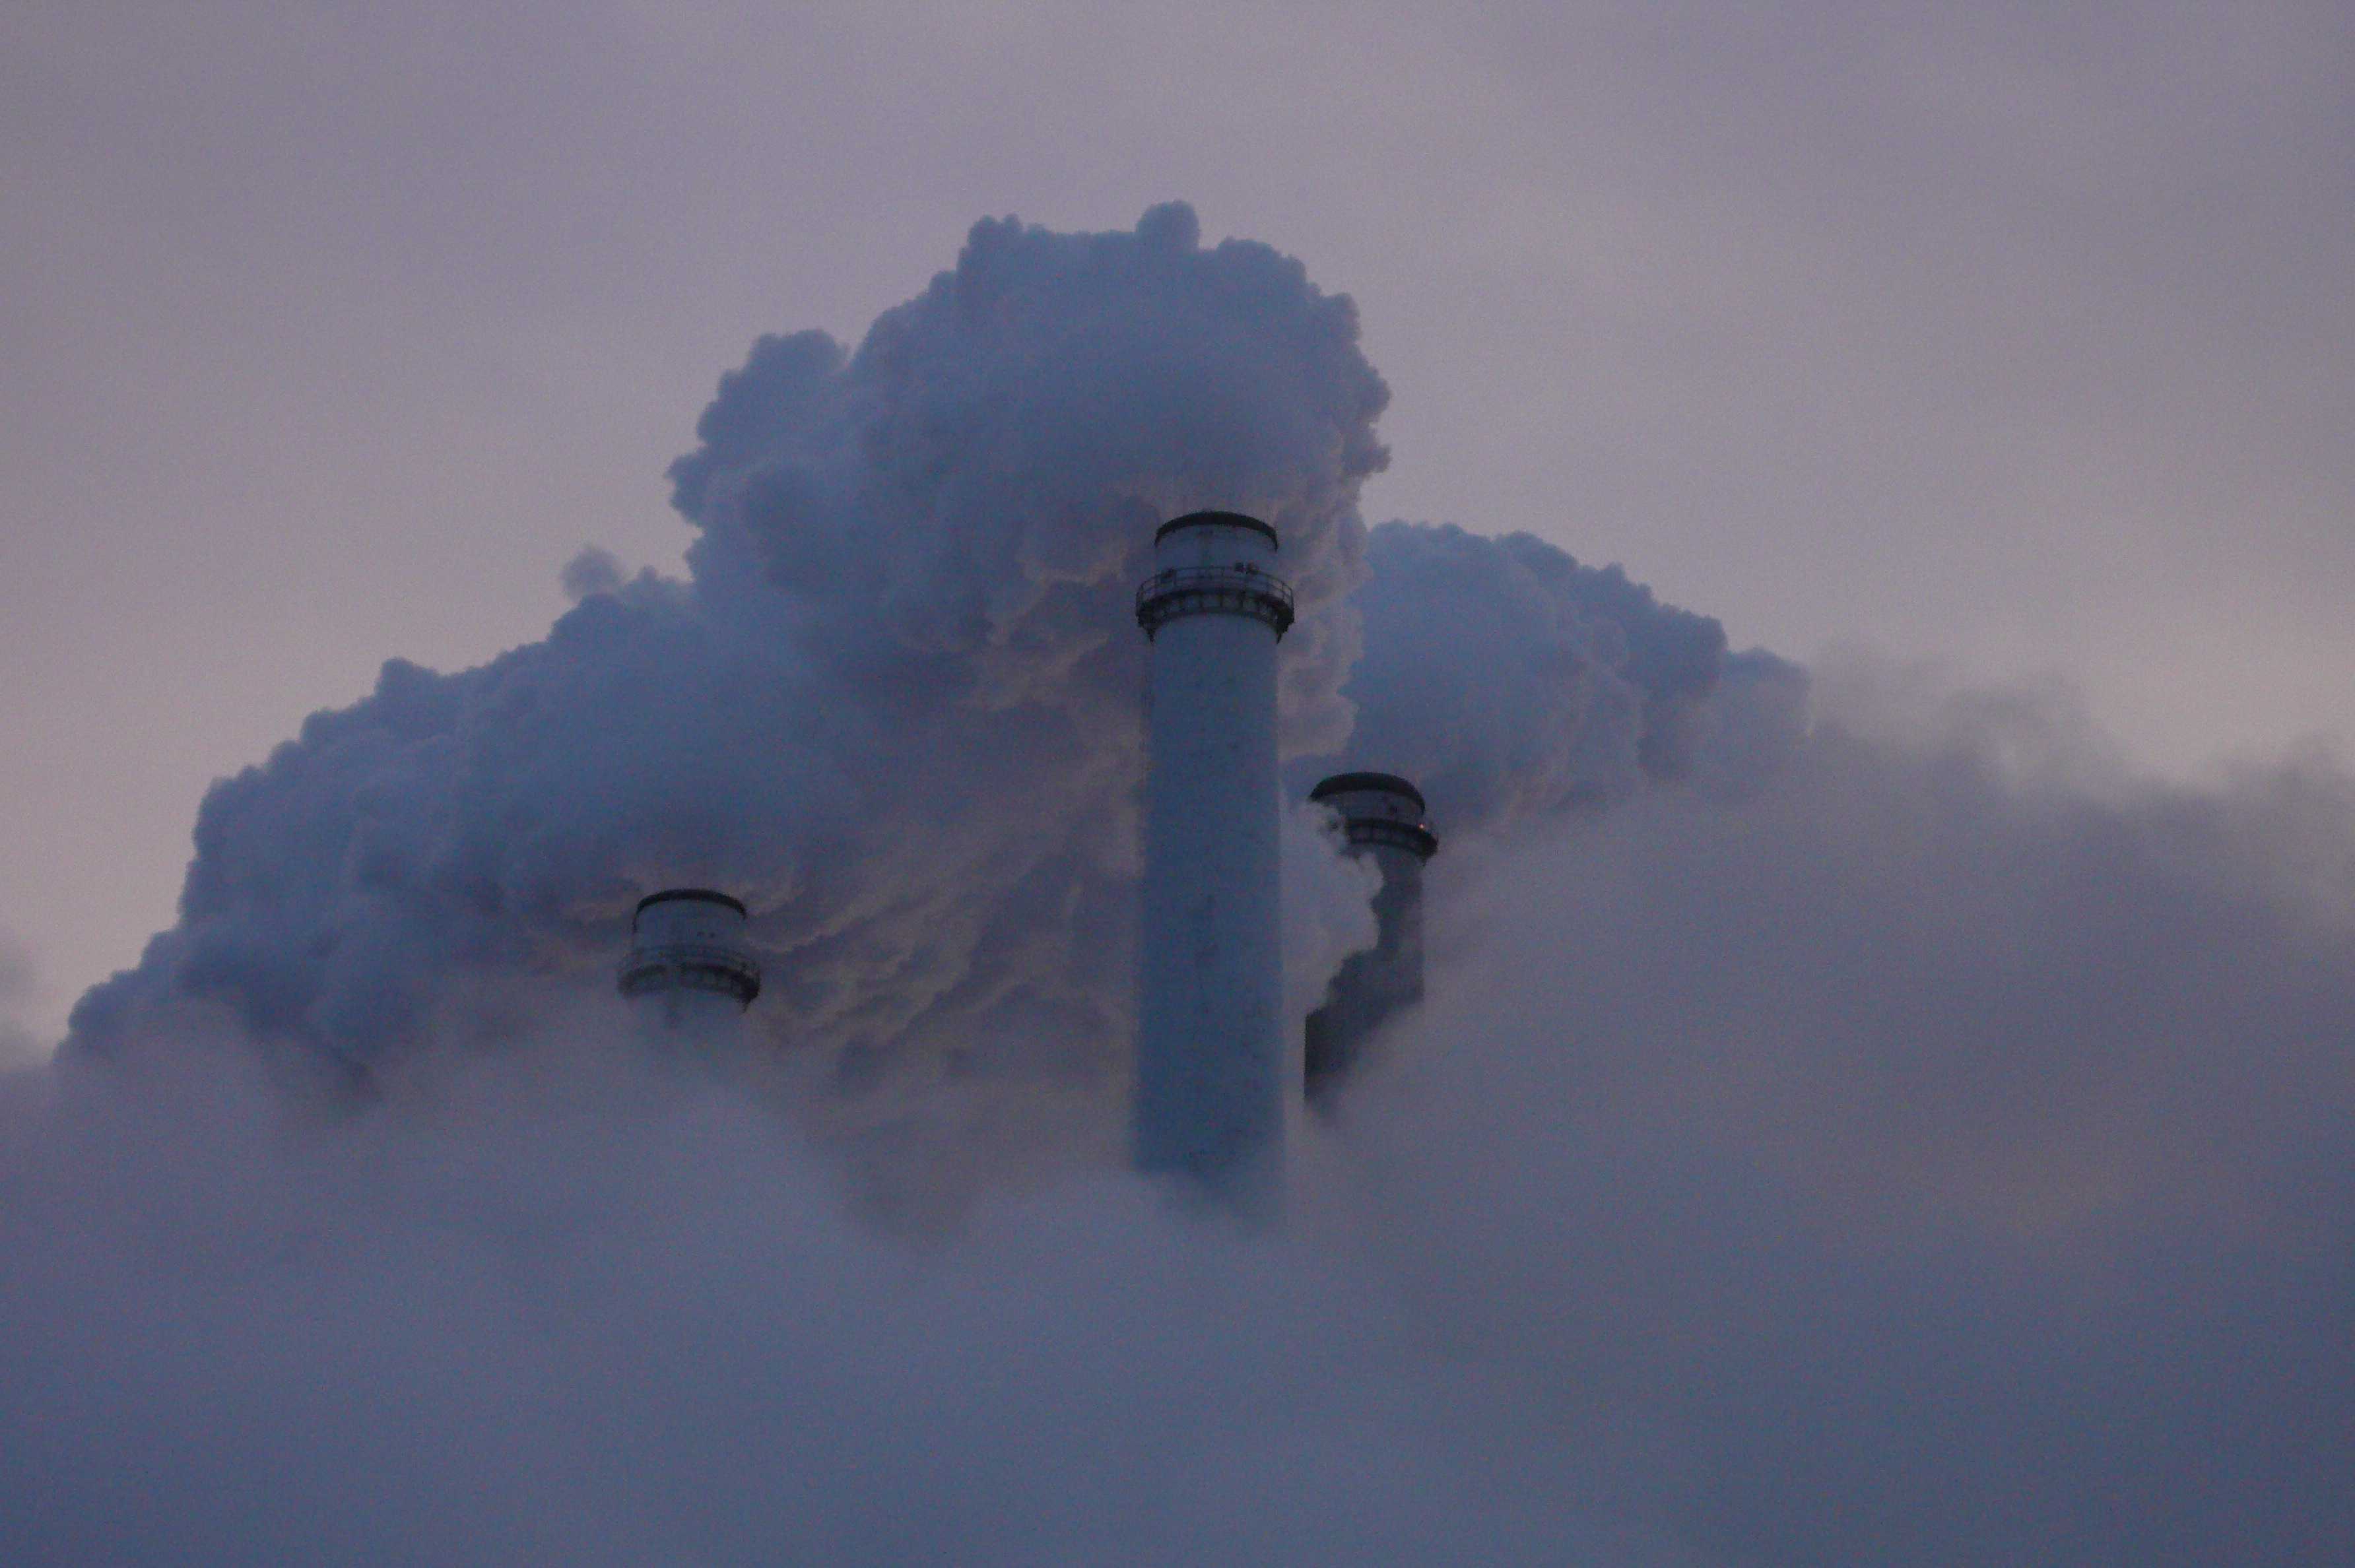 Steam rises from one of the coal-fired power plants in Colstrip, Montana. Puget Sound Energy owns the largest stake in the plant. Photo courtesy of Anne Hedges, Montana Enviornmental Information Center.